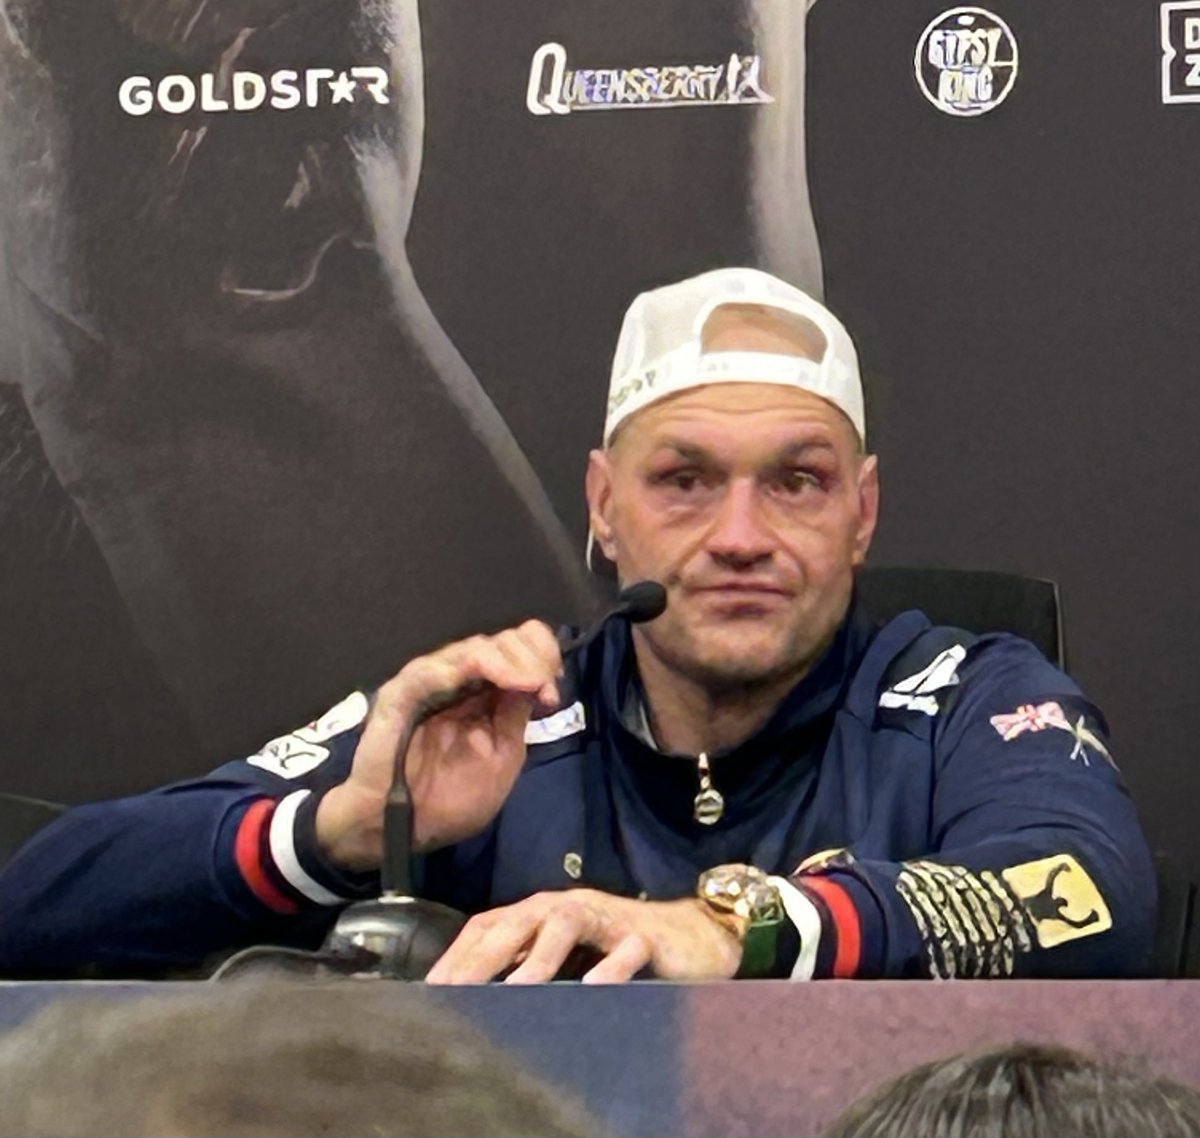 ‼️ Tyson Fury has arrived at the post-fight press conference, Oleksandr Usyk has gone to hospital with a suspected broken jaw and won’t be attending…